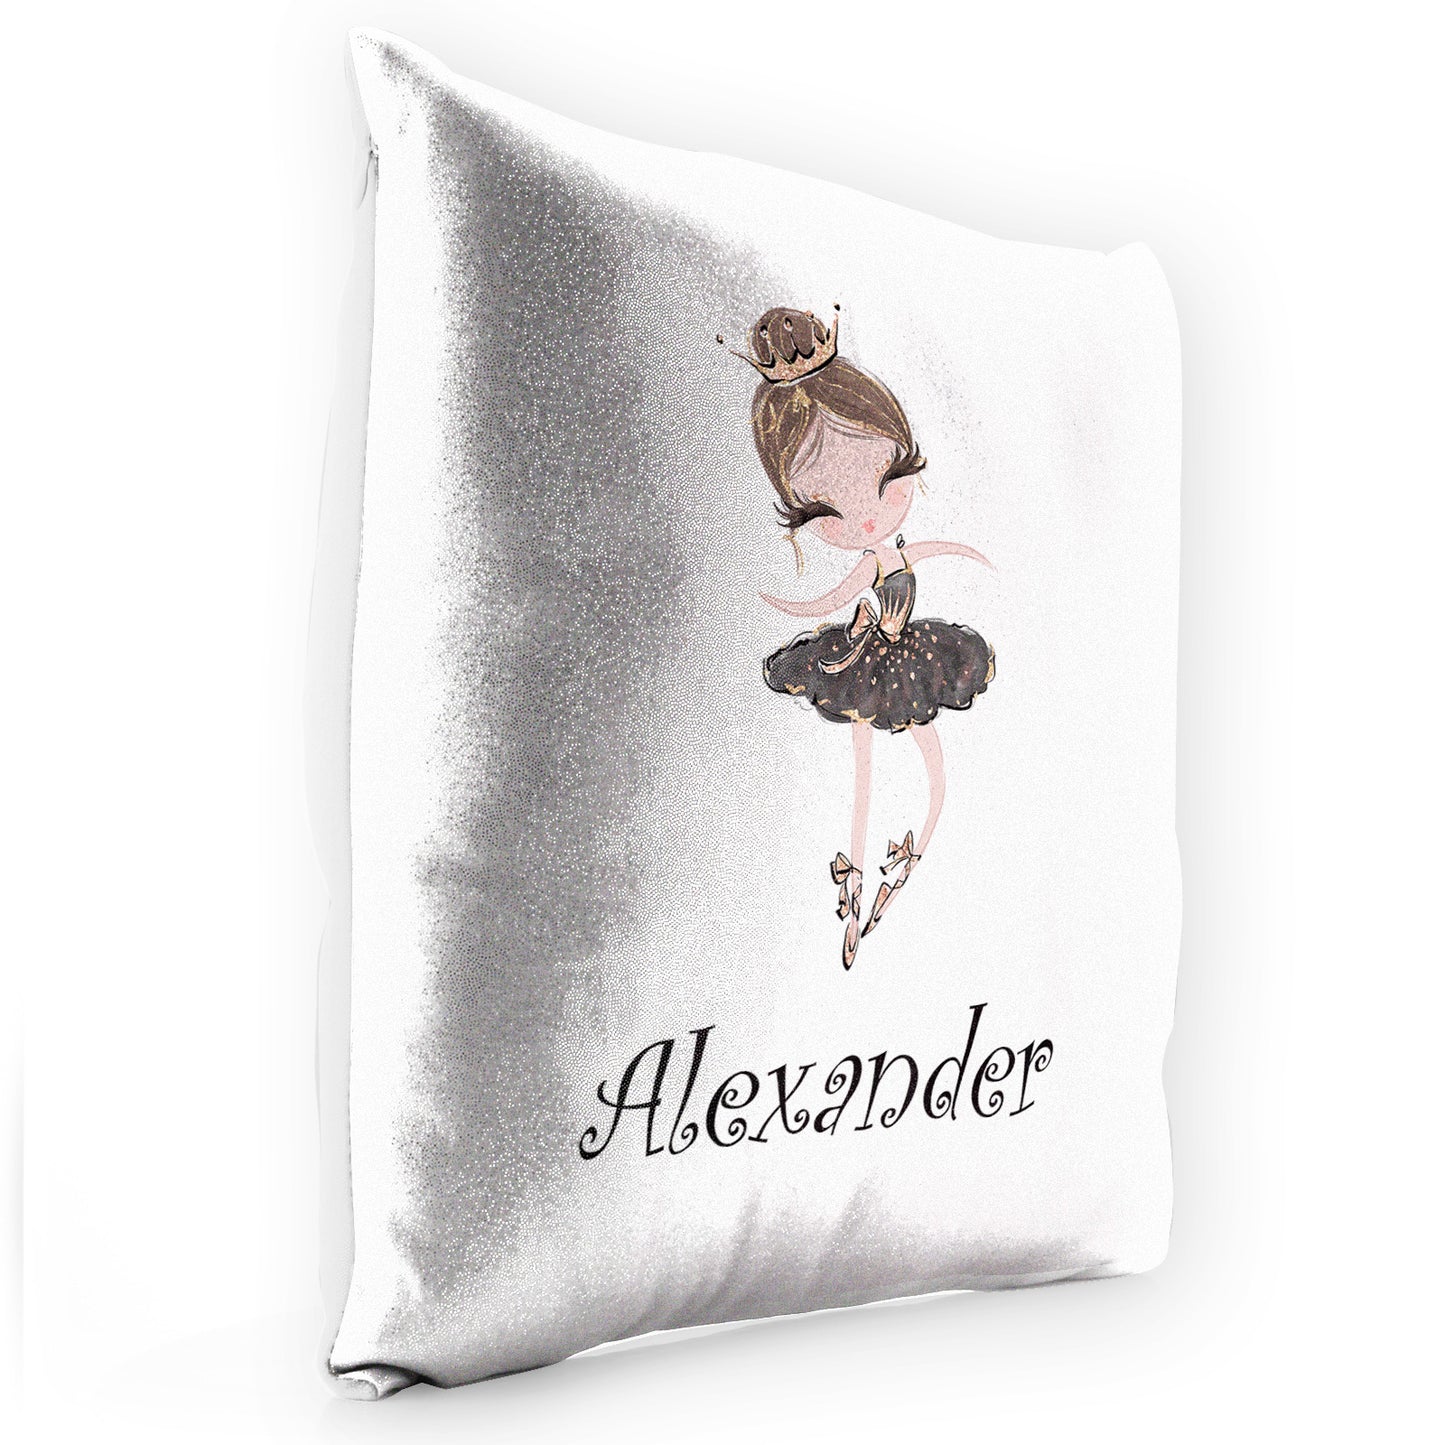 Personalised Glitter Cushion with Cute Text and Light Brown Hair Black Dress Tiara Ballerina